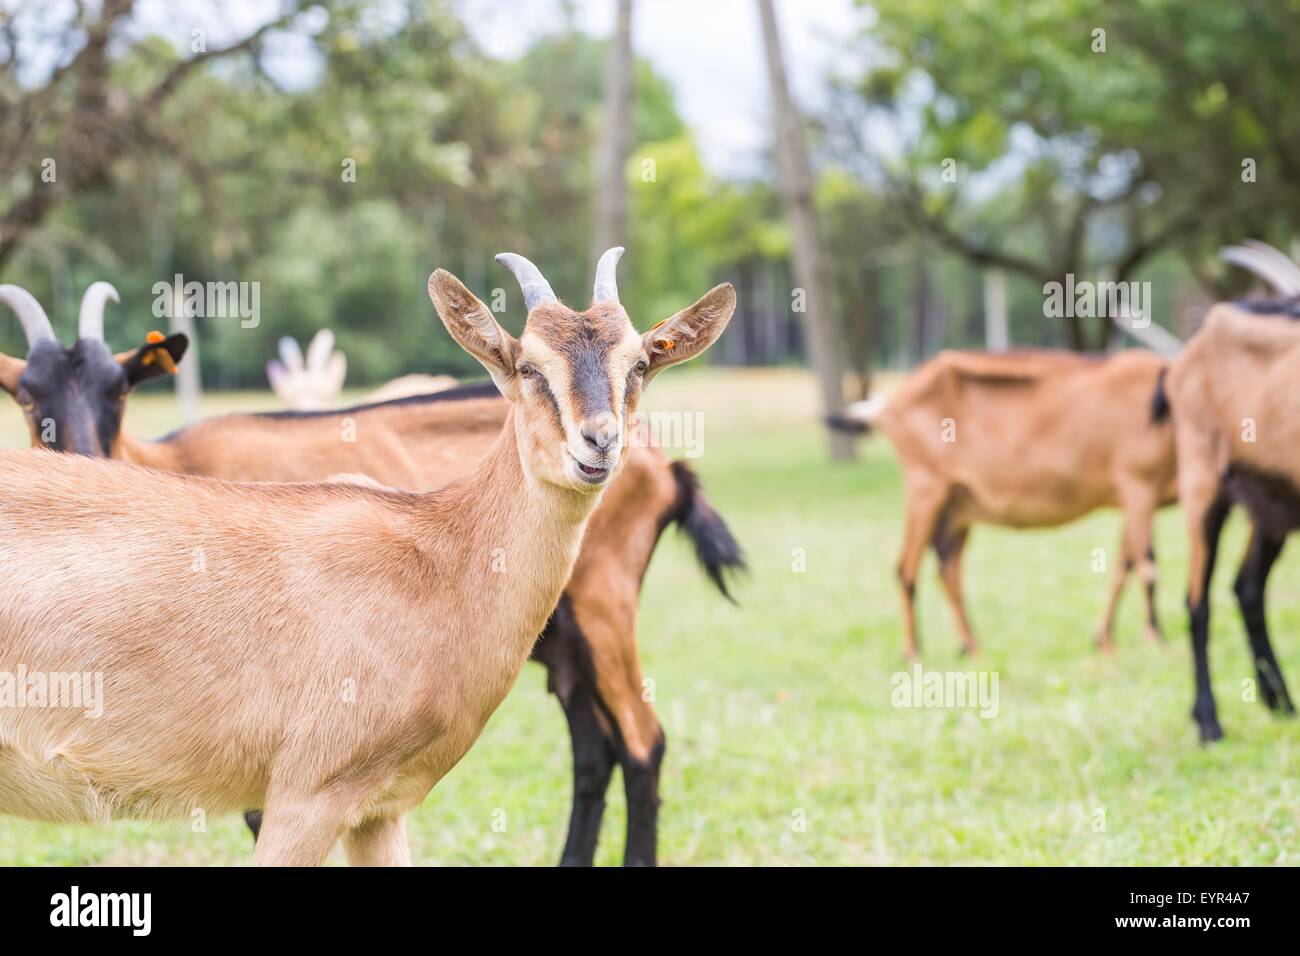 Herd of goats on pasture. Farm animal photographed on pasture in morning light Stock Photo